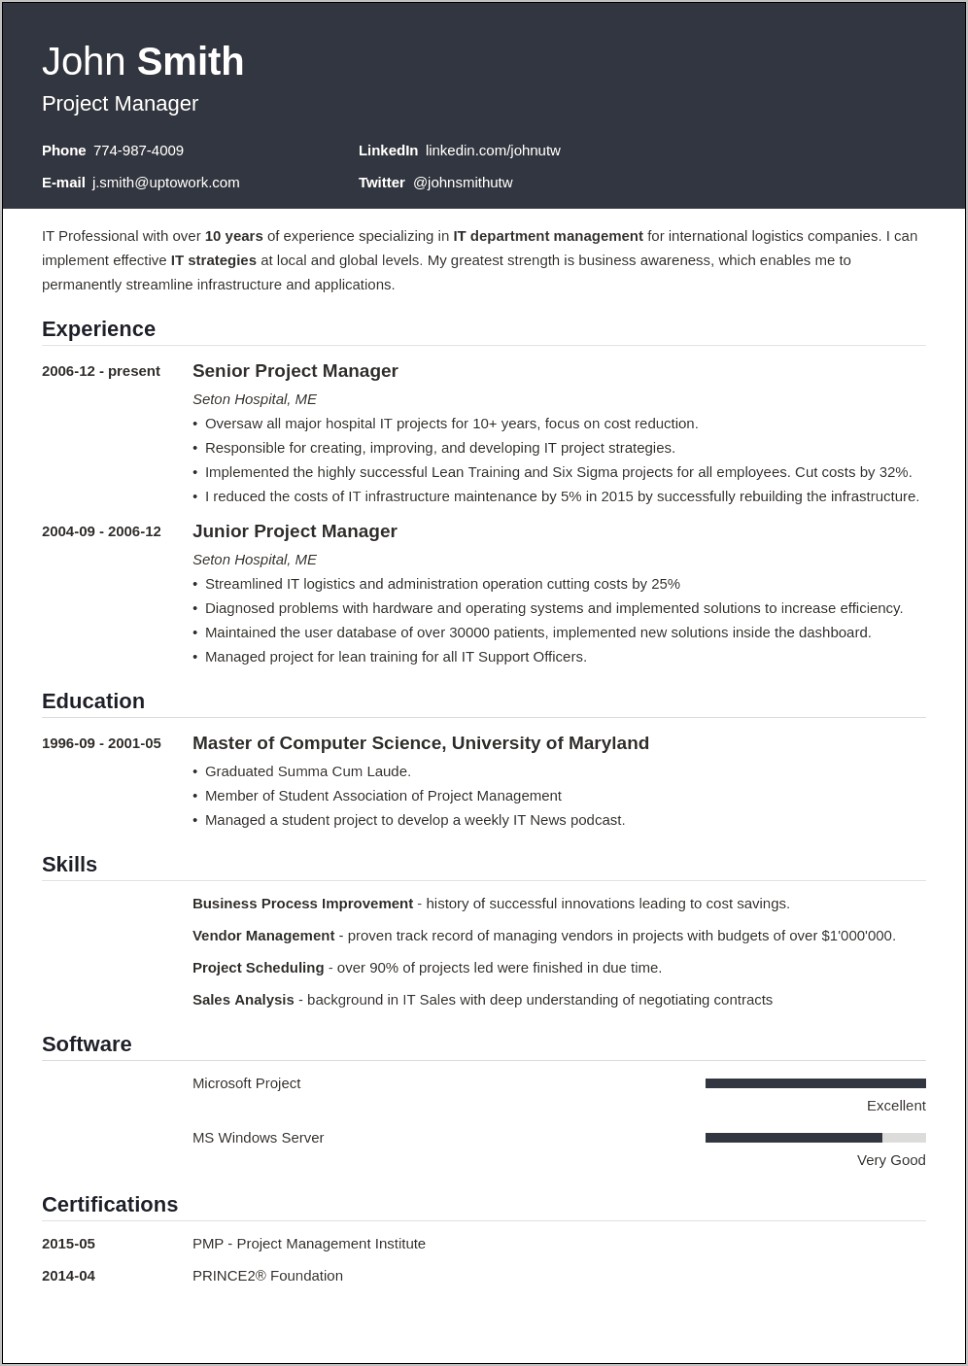 Professional Resume Photo For Work Setup Suggestions